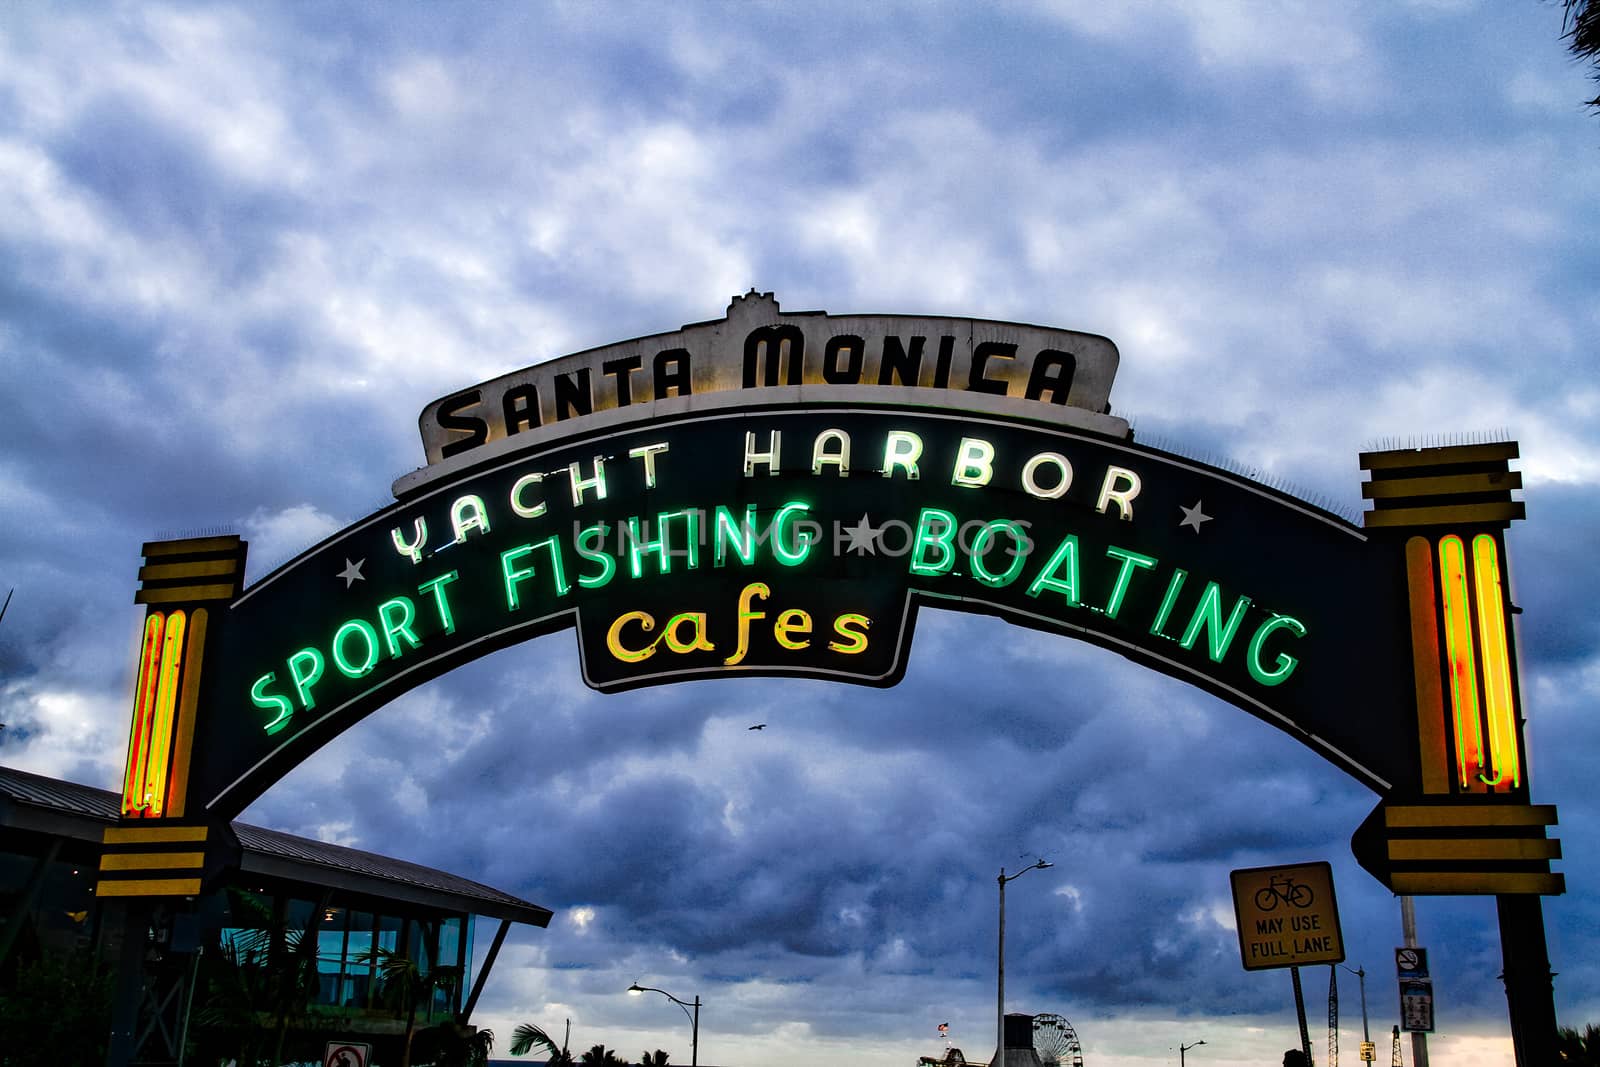 Los Angeles,CA/USA - Oct 29, 2015 : Welcoming arch in Santa Monica, California. The city has 3.5 miles of beach locations.Santa Monica Pier, Picture of the entrance with the famous arch sign. by USA-TARO